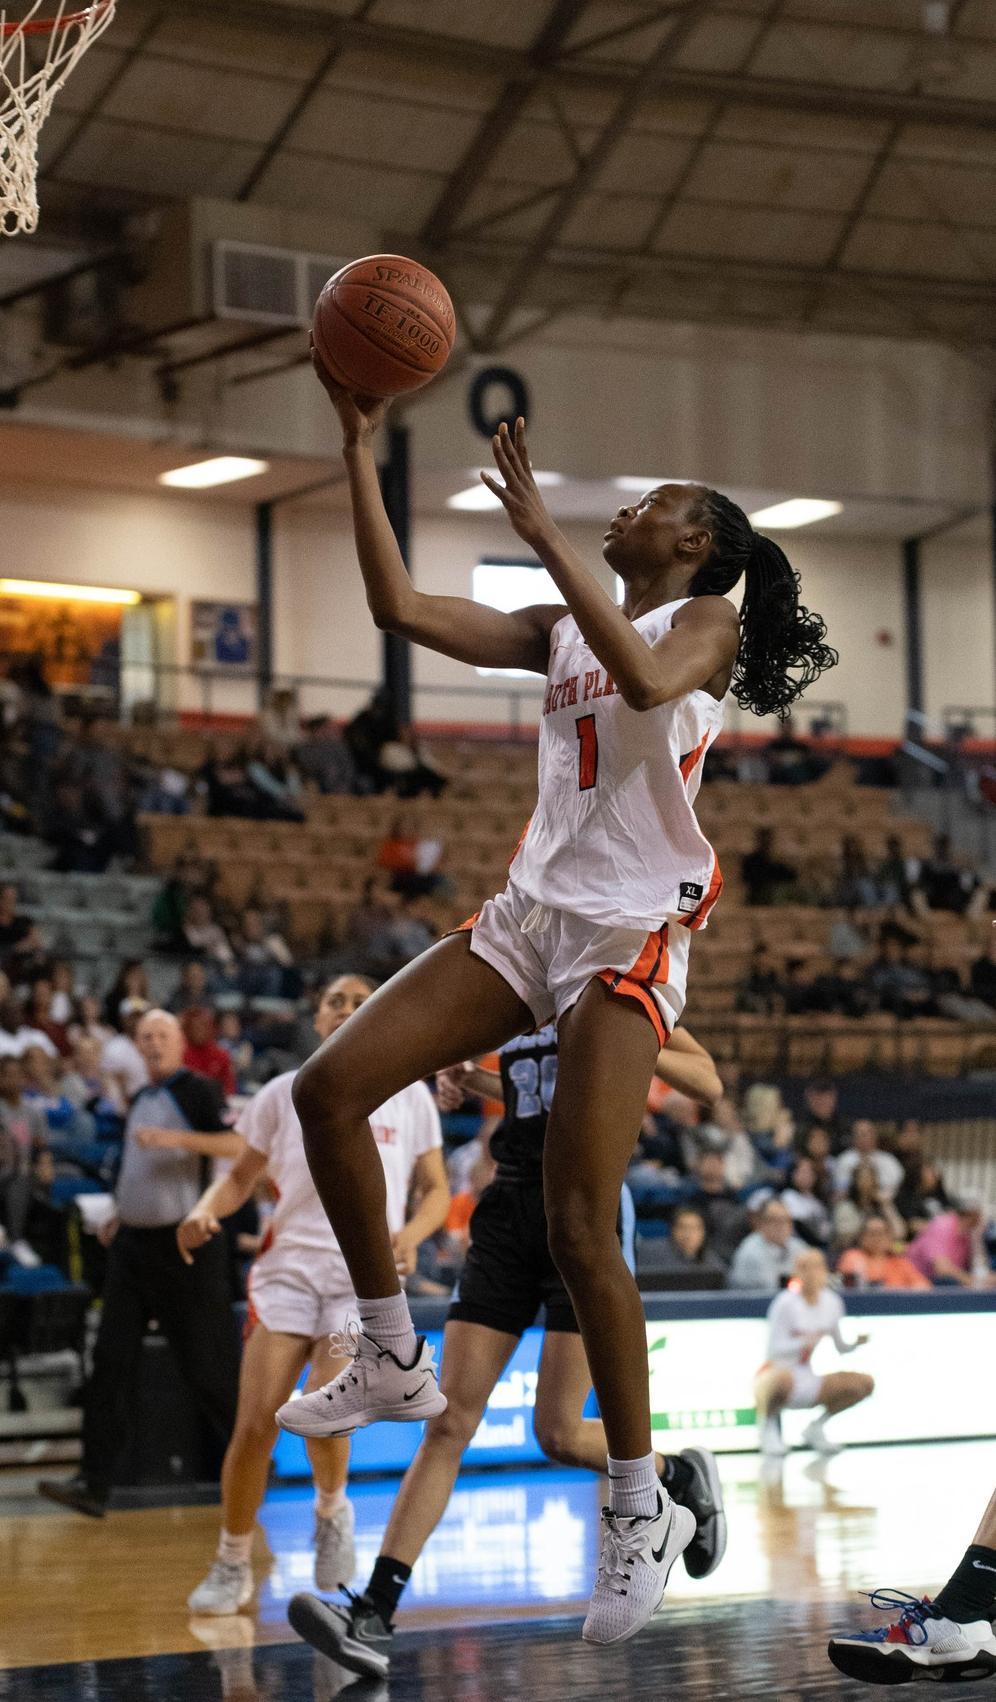 Sumbane drops 20 as Lady Texans hold off Frank Phillips 53-49 Monday in Borger